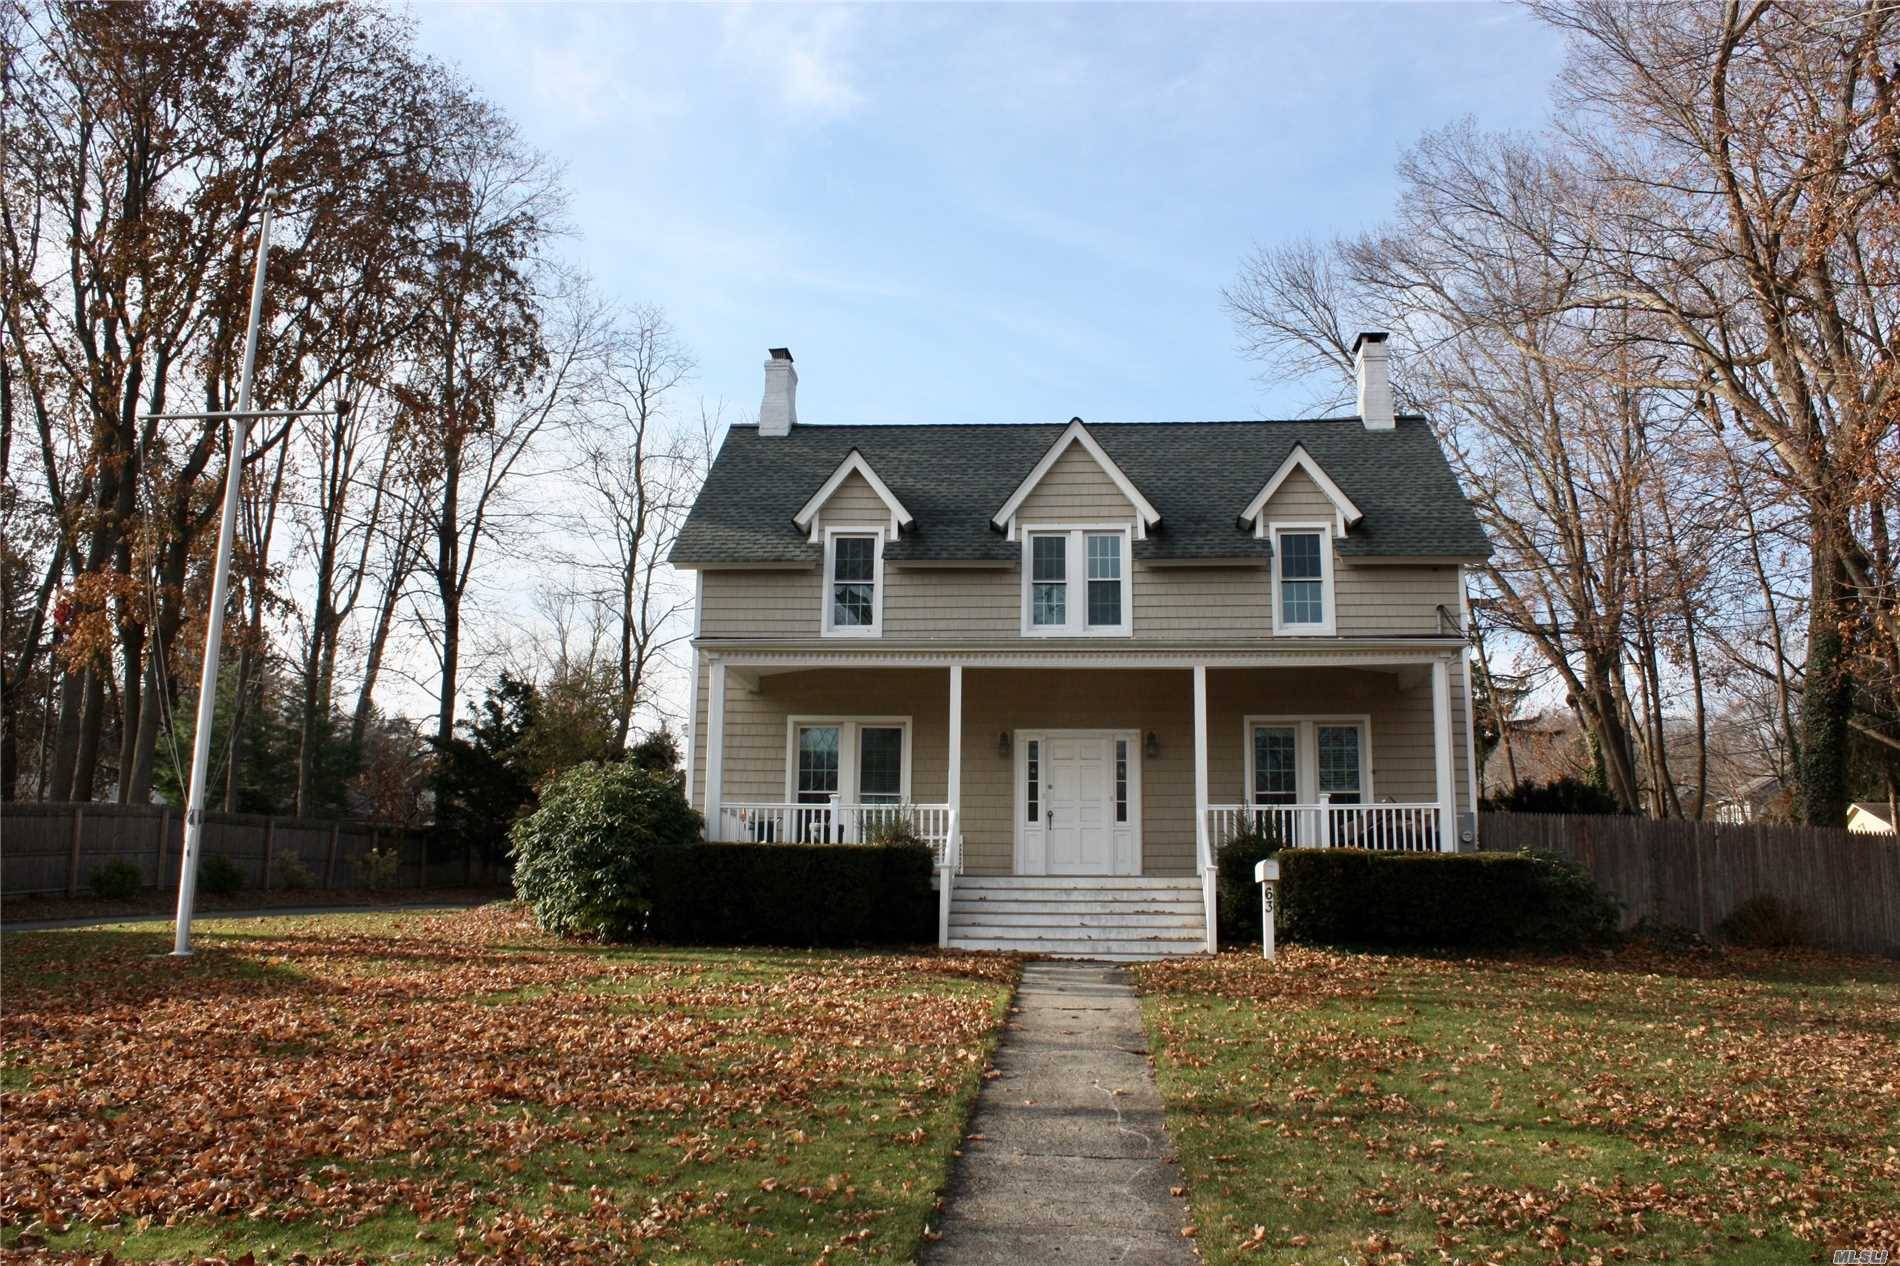 Beautiful Classic Village Colonial Only 2 Blocks From Main Street's Shops And Restaurants.